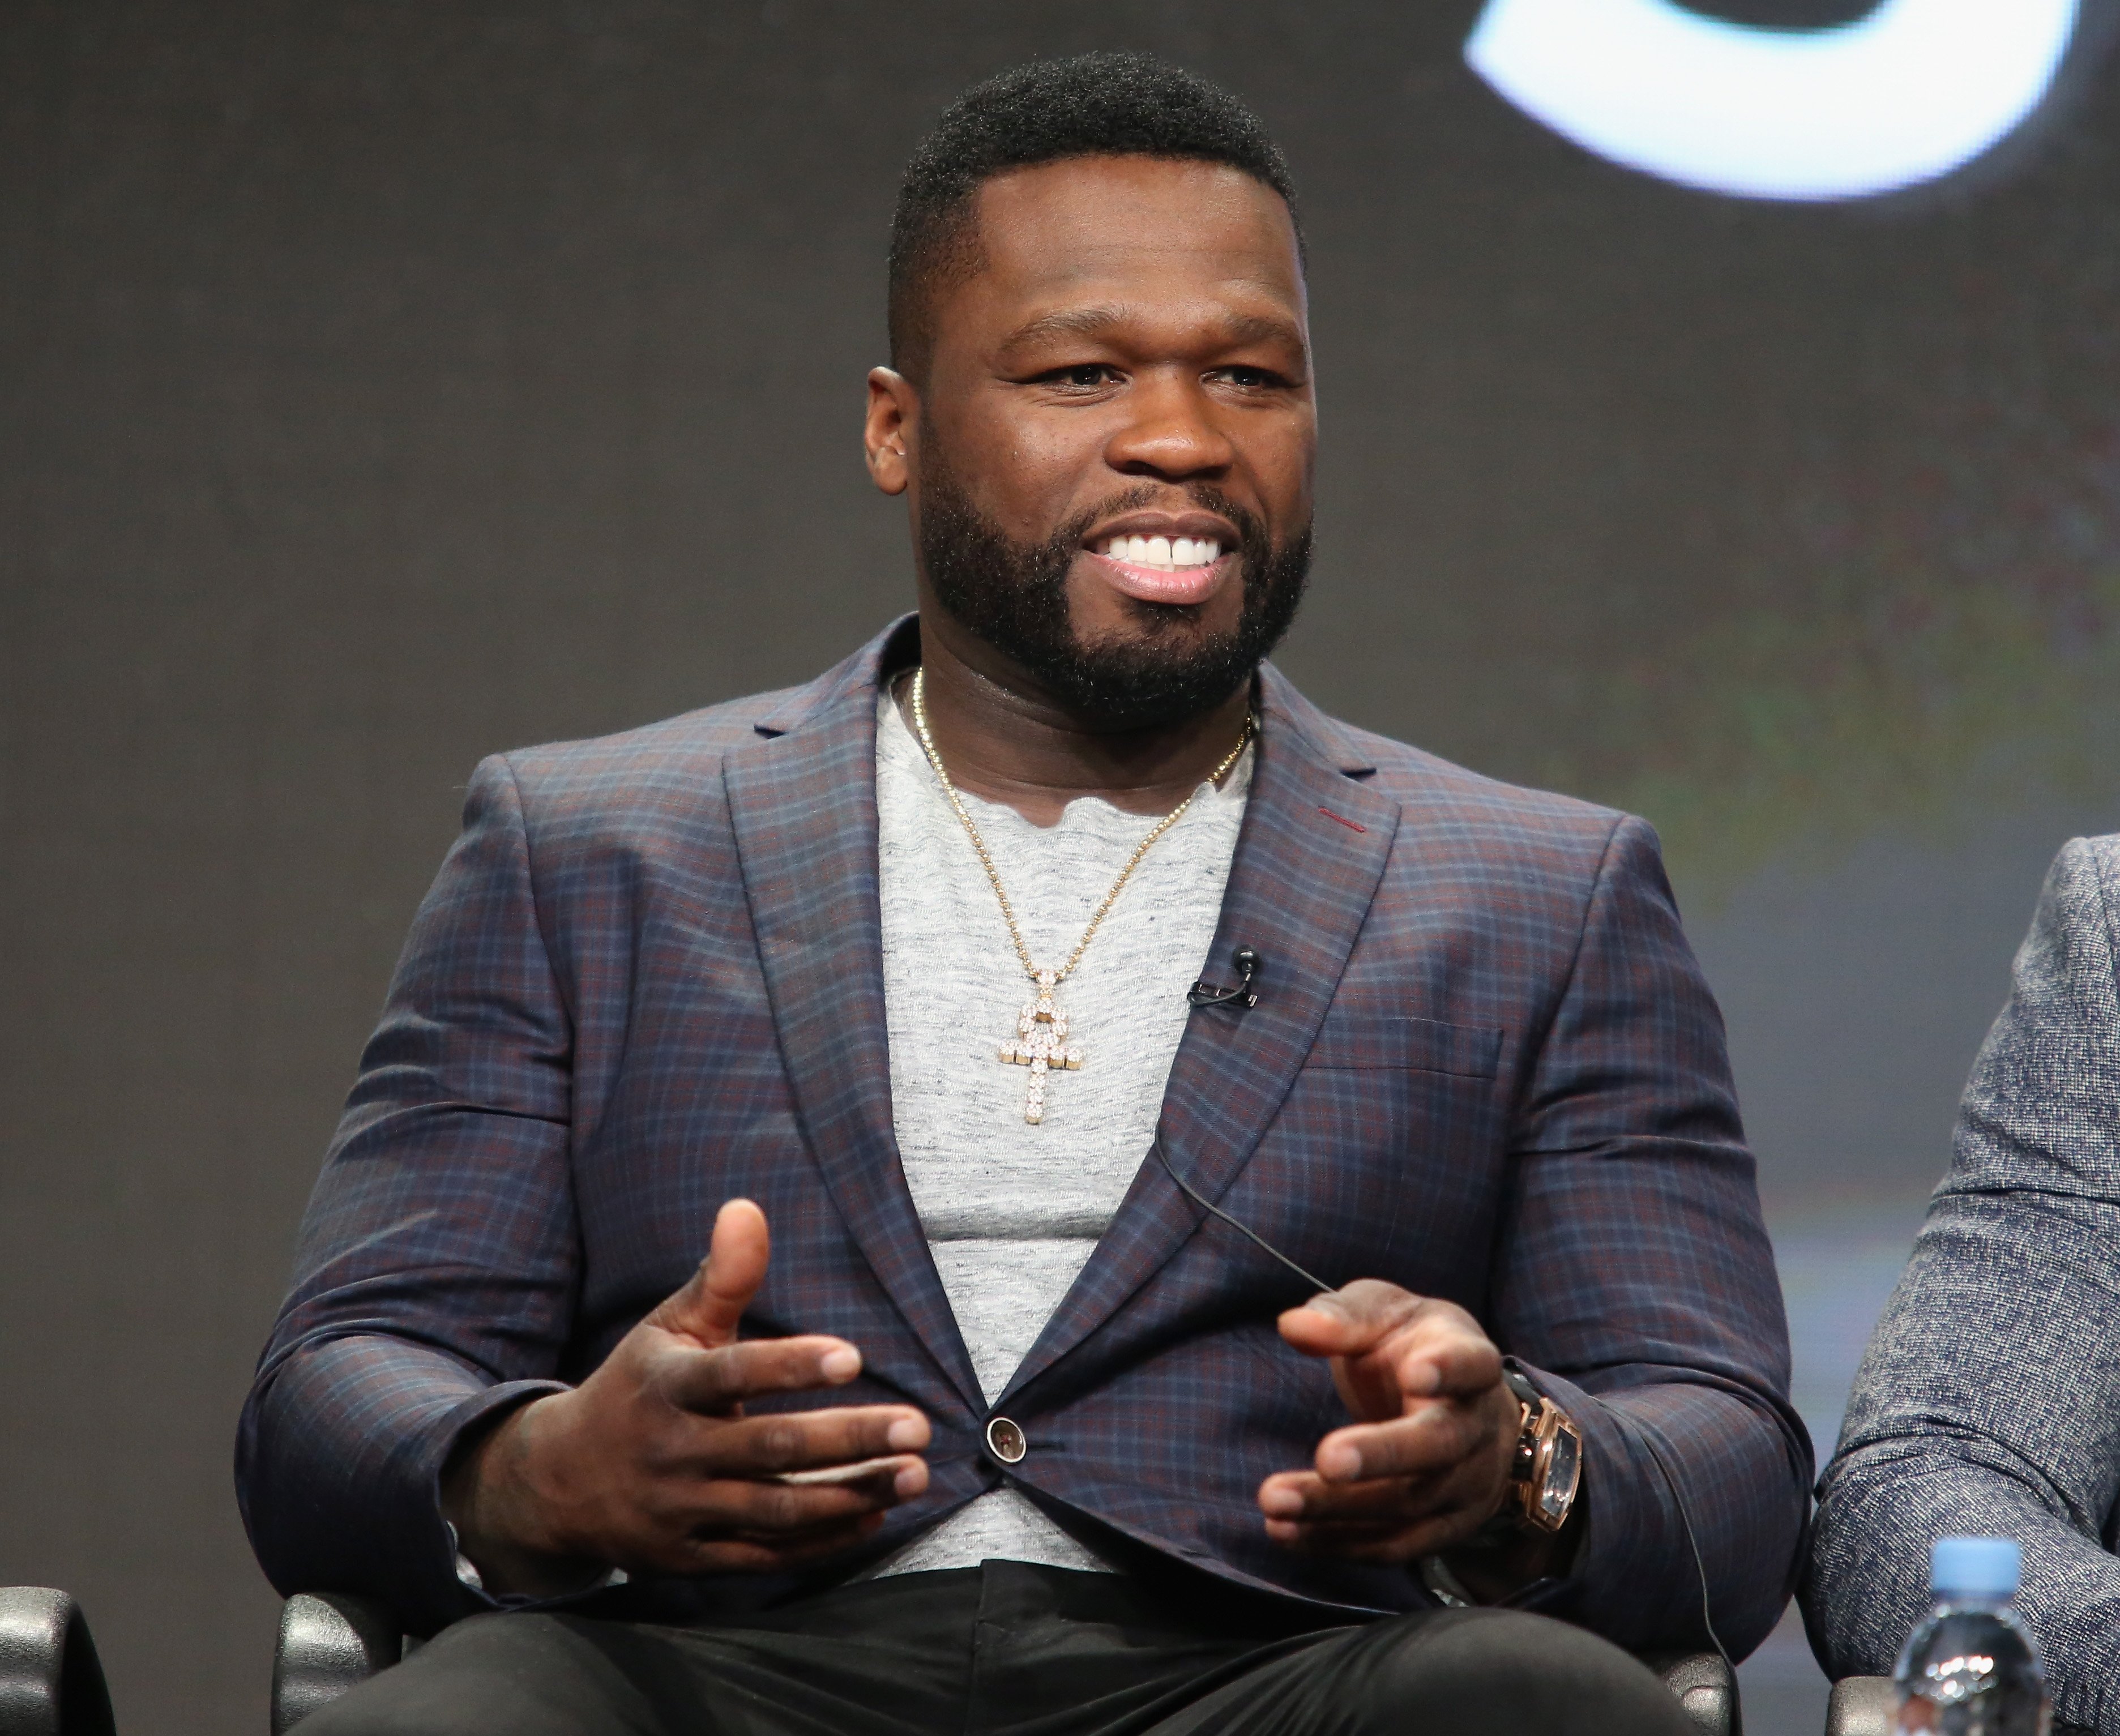 50 Cent at a panel discussion during the 2016 Summer TCA Tour. | Photo: Getty Images